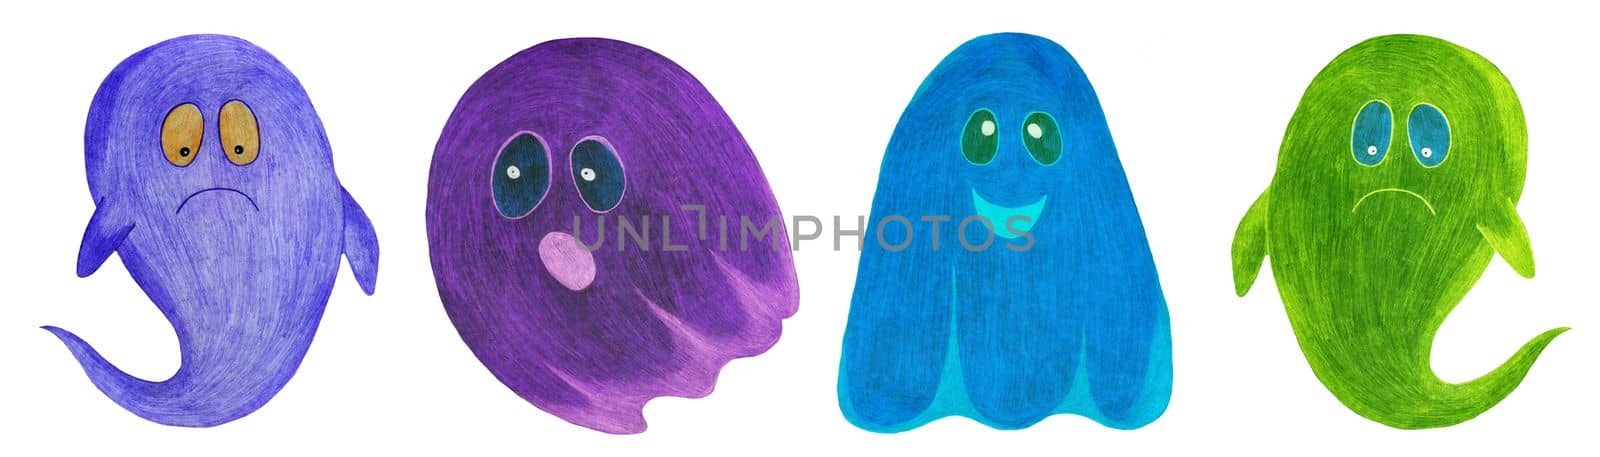 Set of Hand Drawn Halloween Ghosts Isolated on White Background. by Rina_Dozornaya